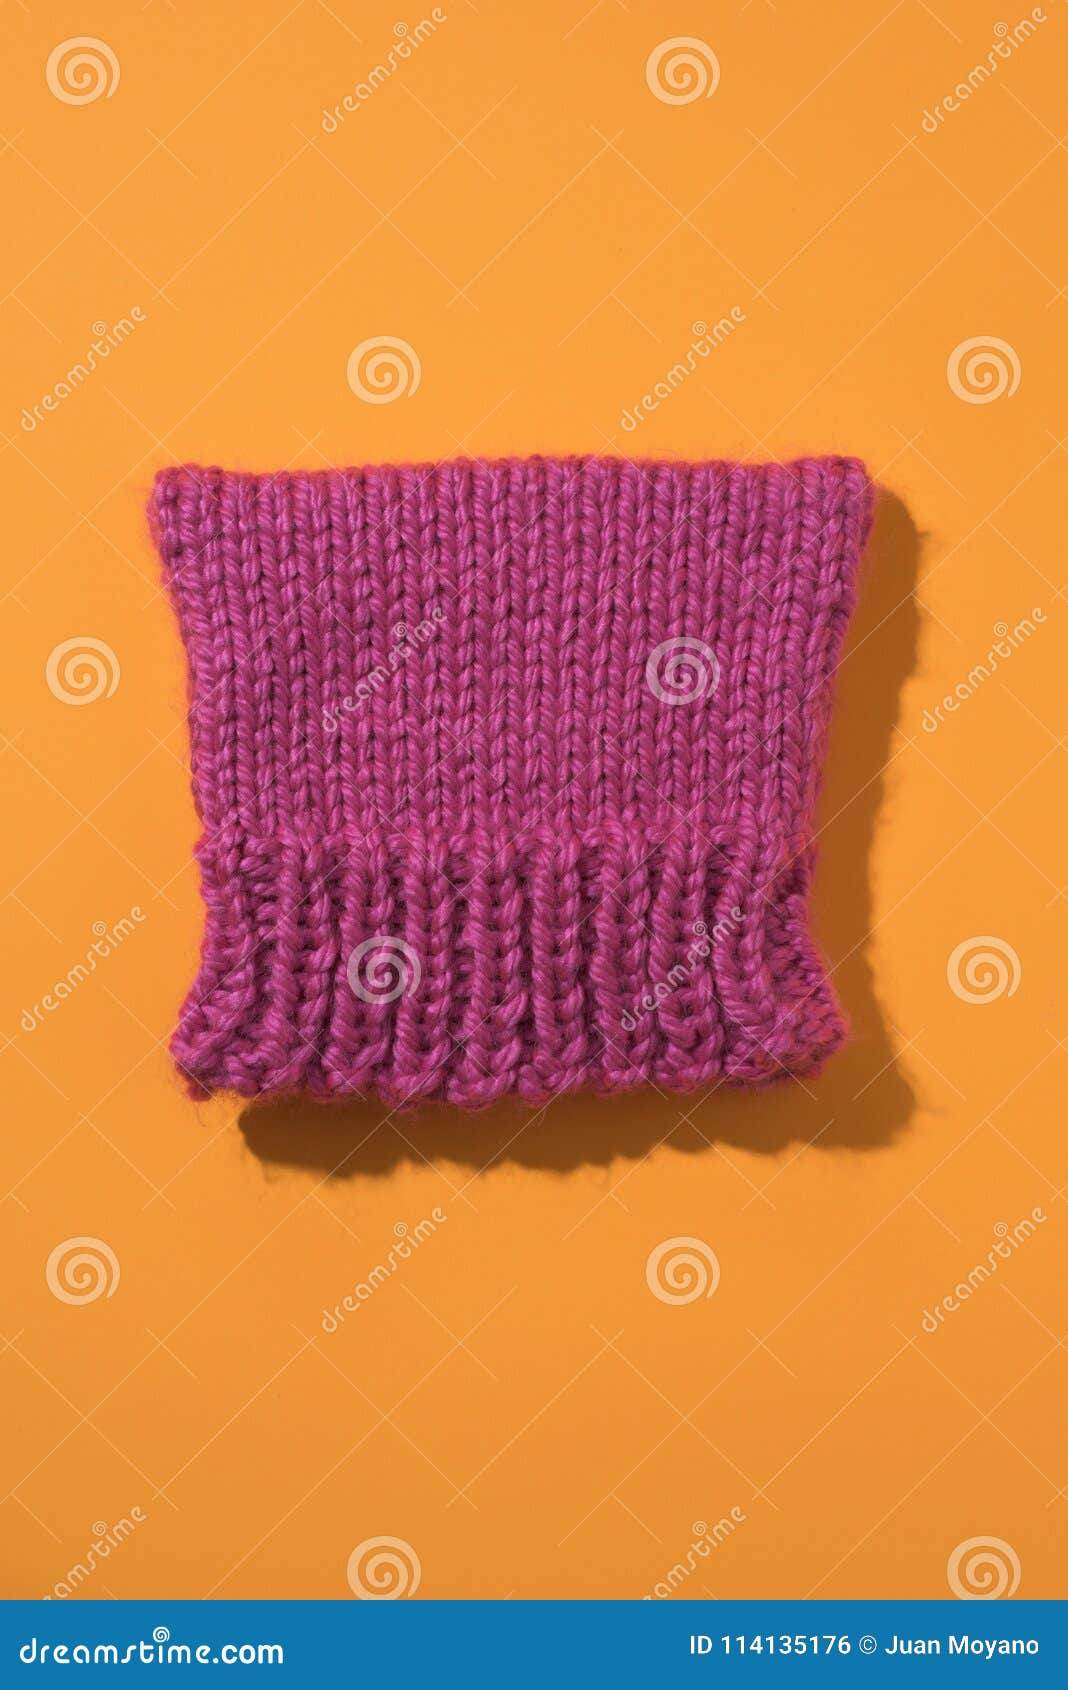 pink knit hat, known as pussycat hat or pussyhat